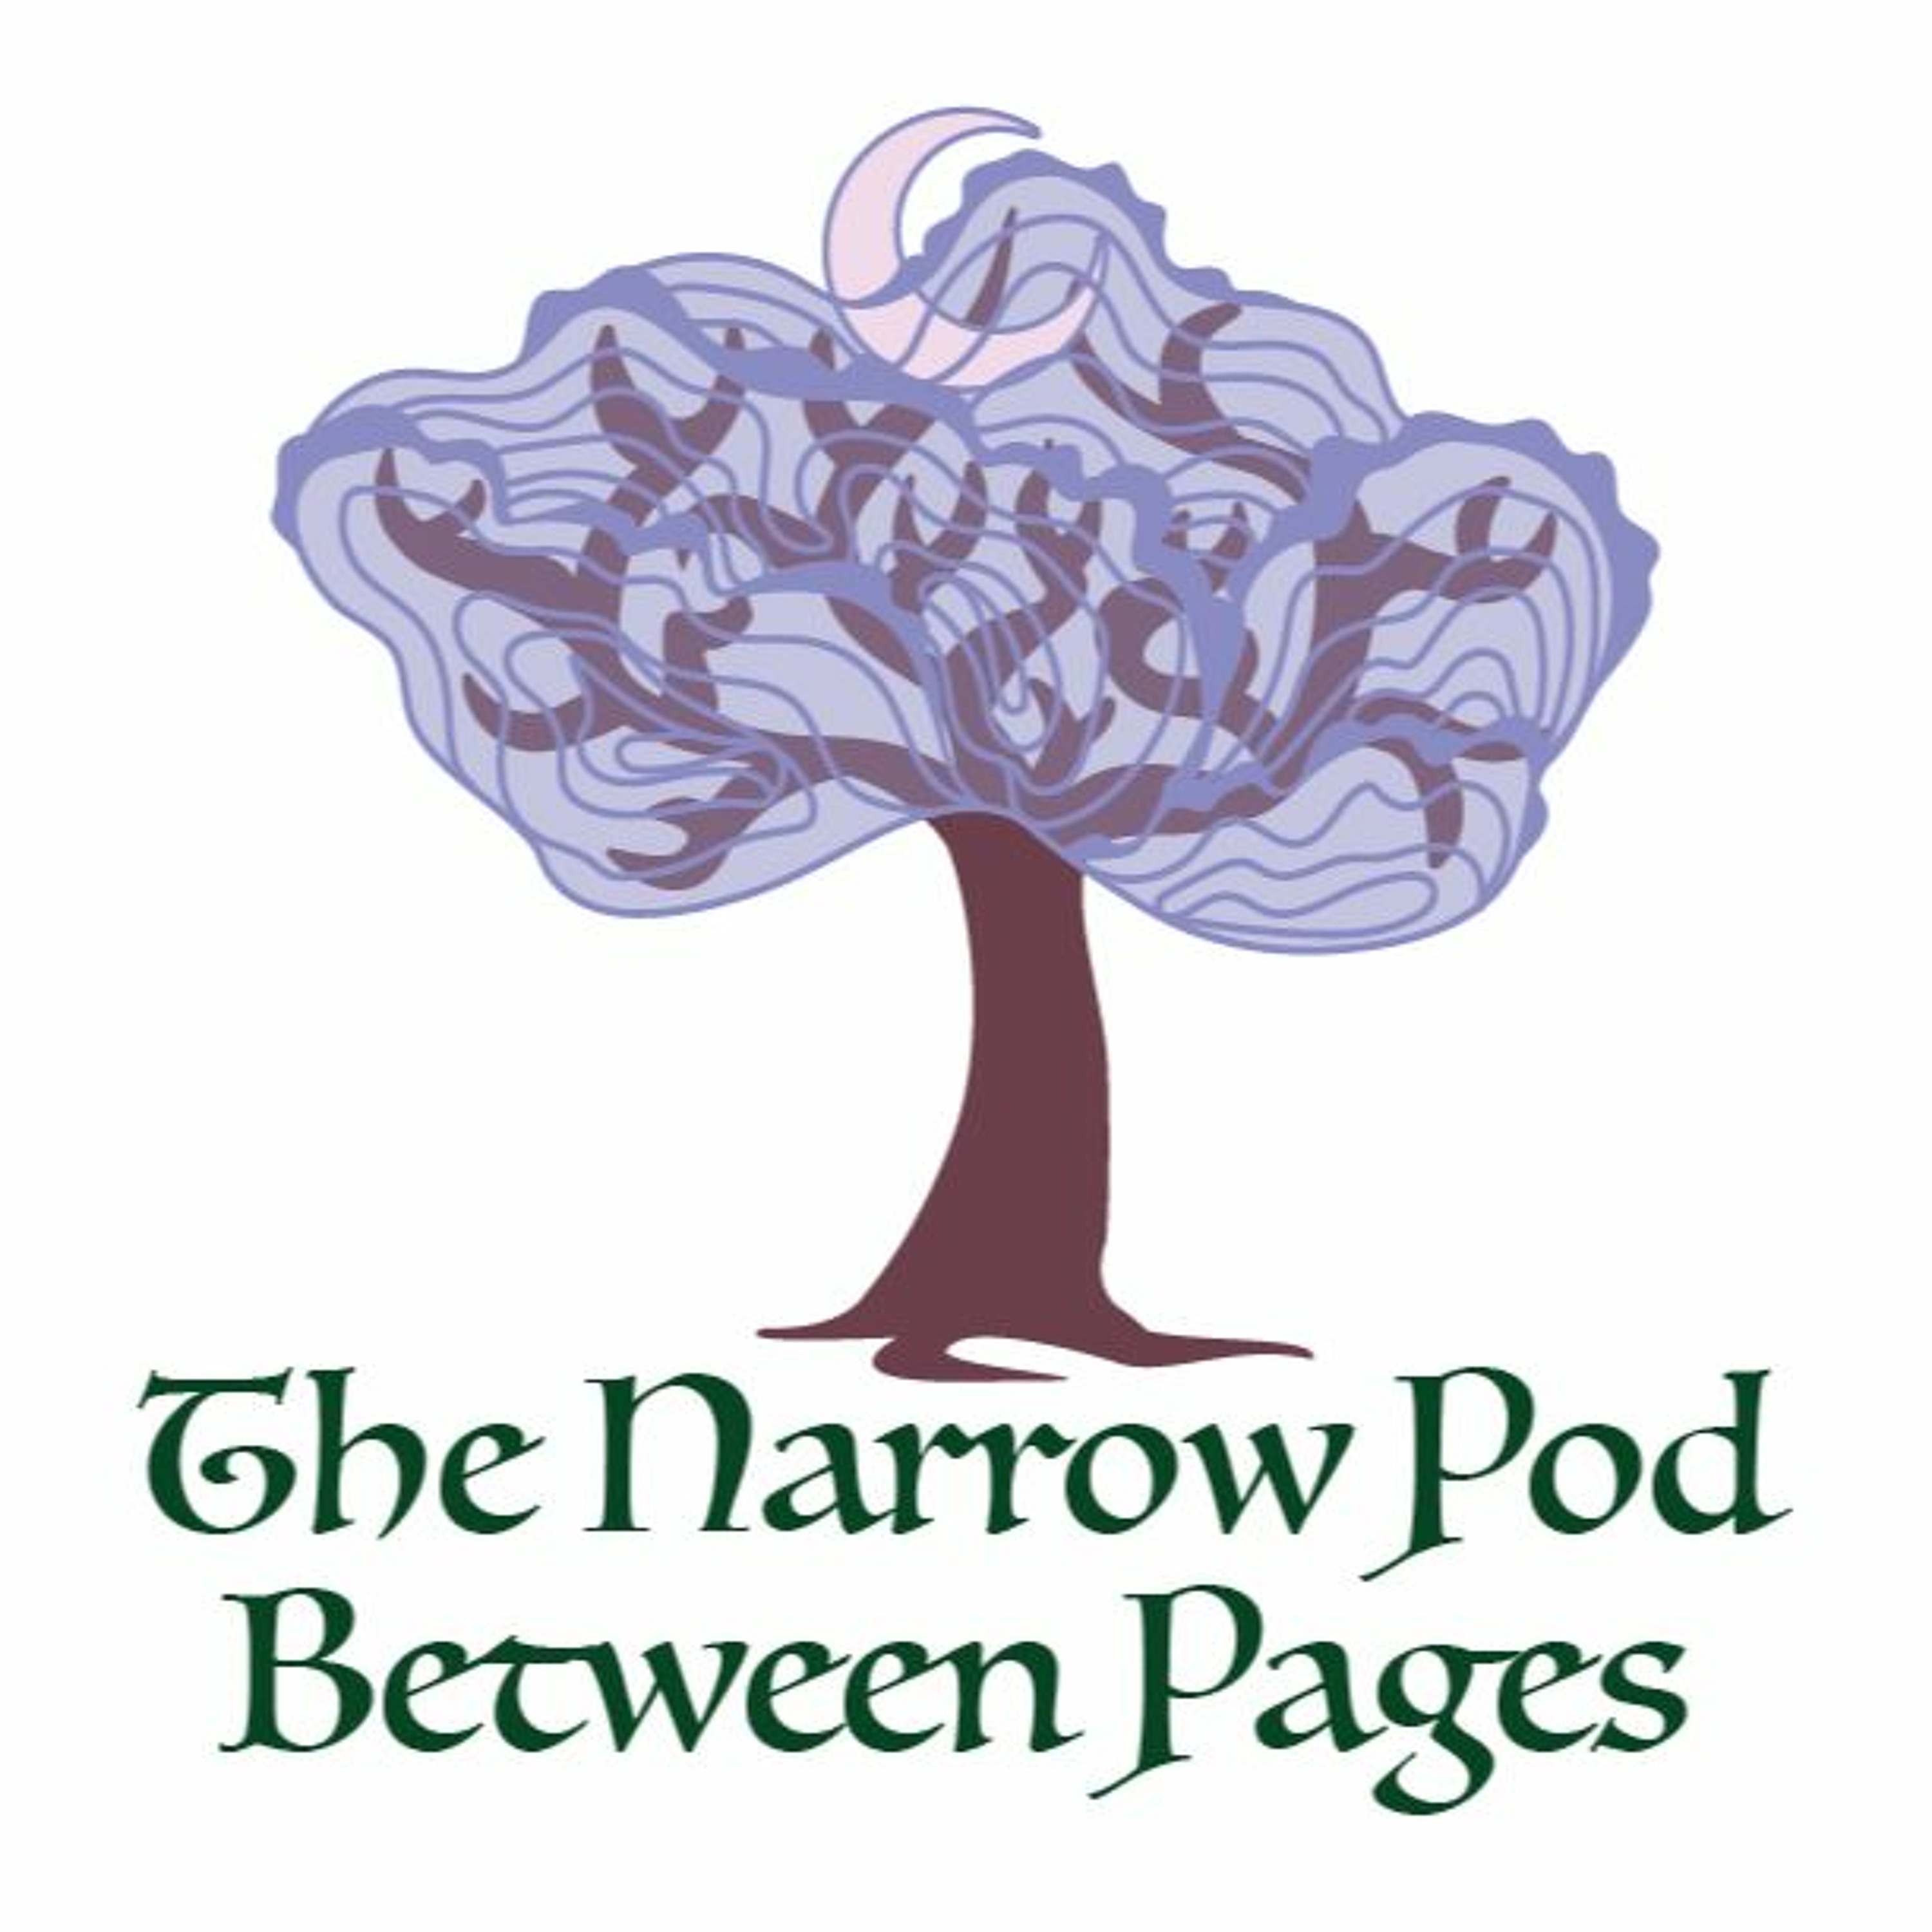 The Narrow Pod Between Pages - Page 98-99: Wibbly wobbly timey wimey